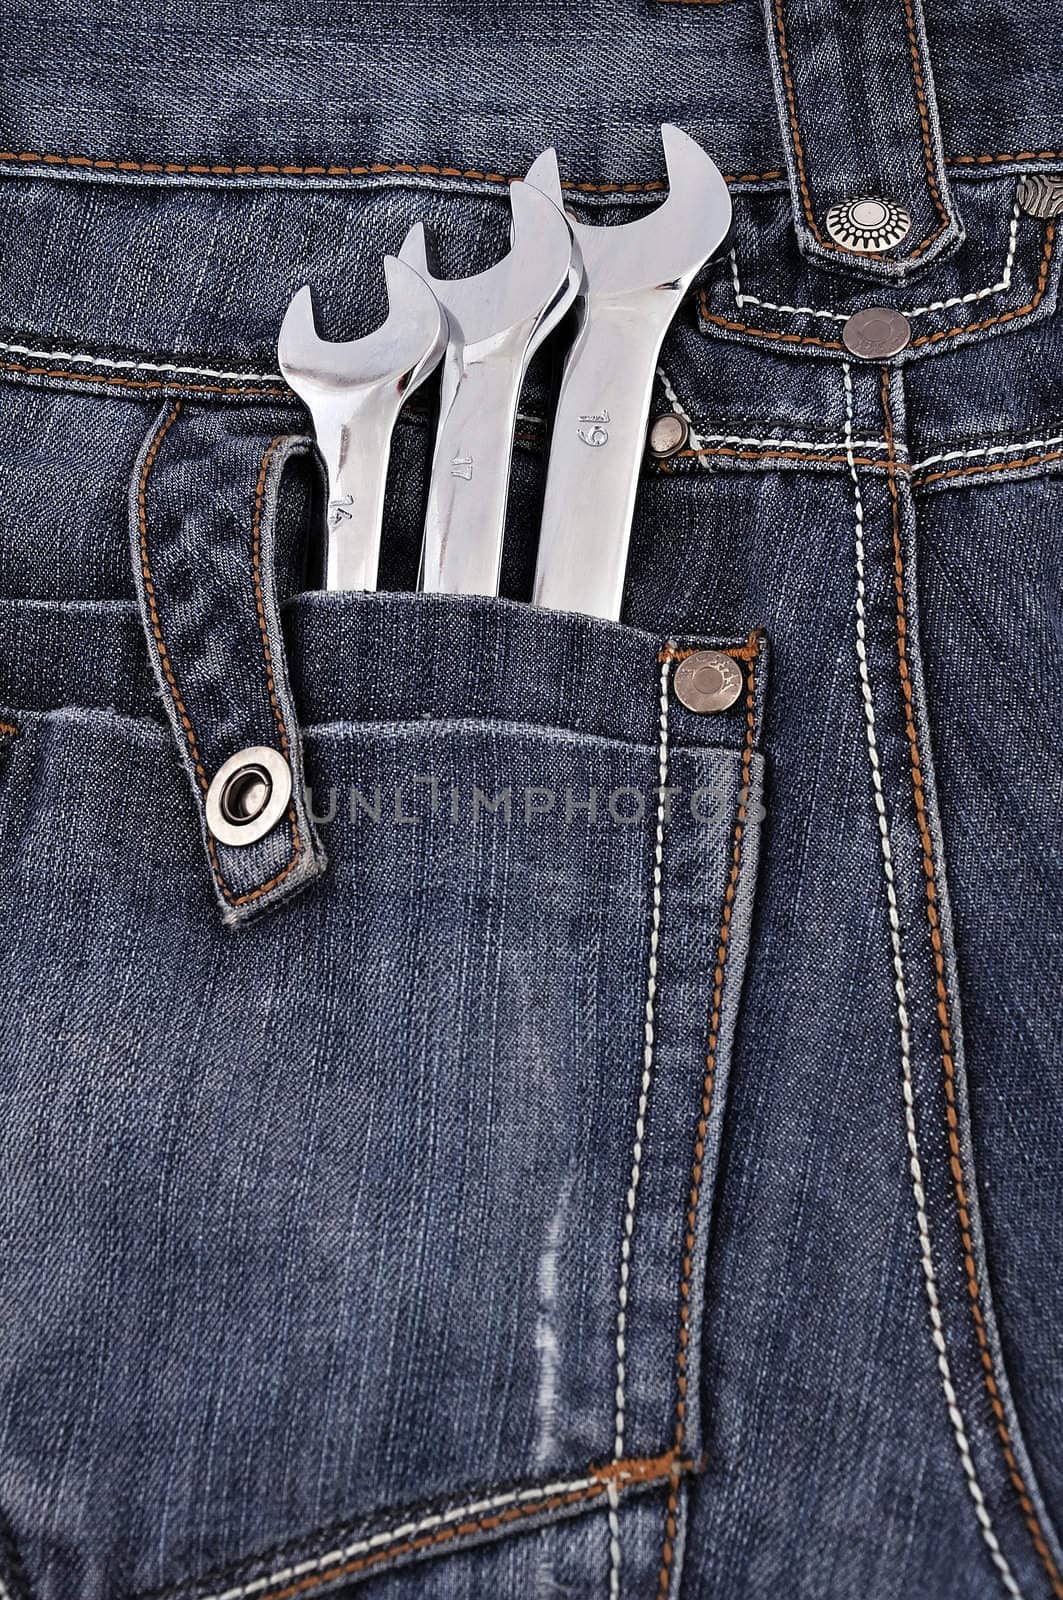 spanners in the back pocket Jeans